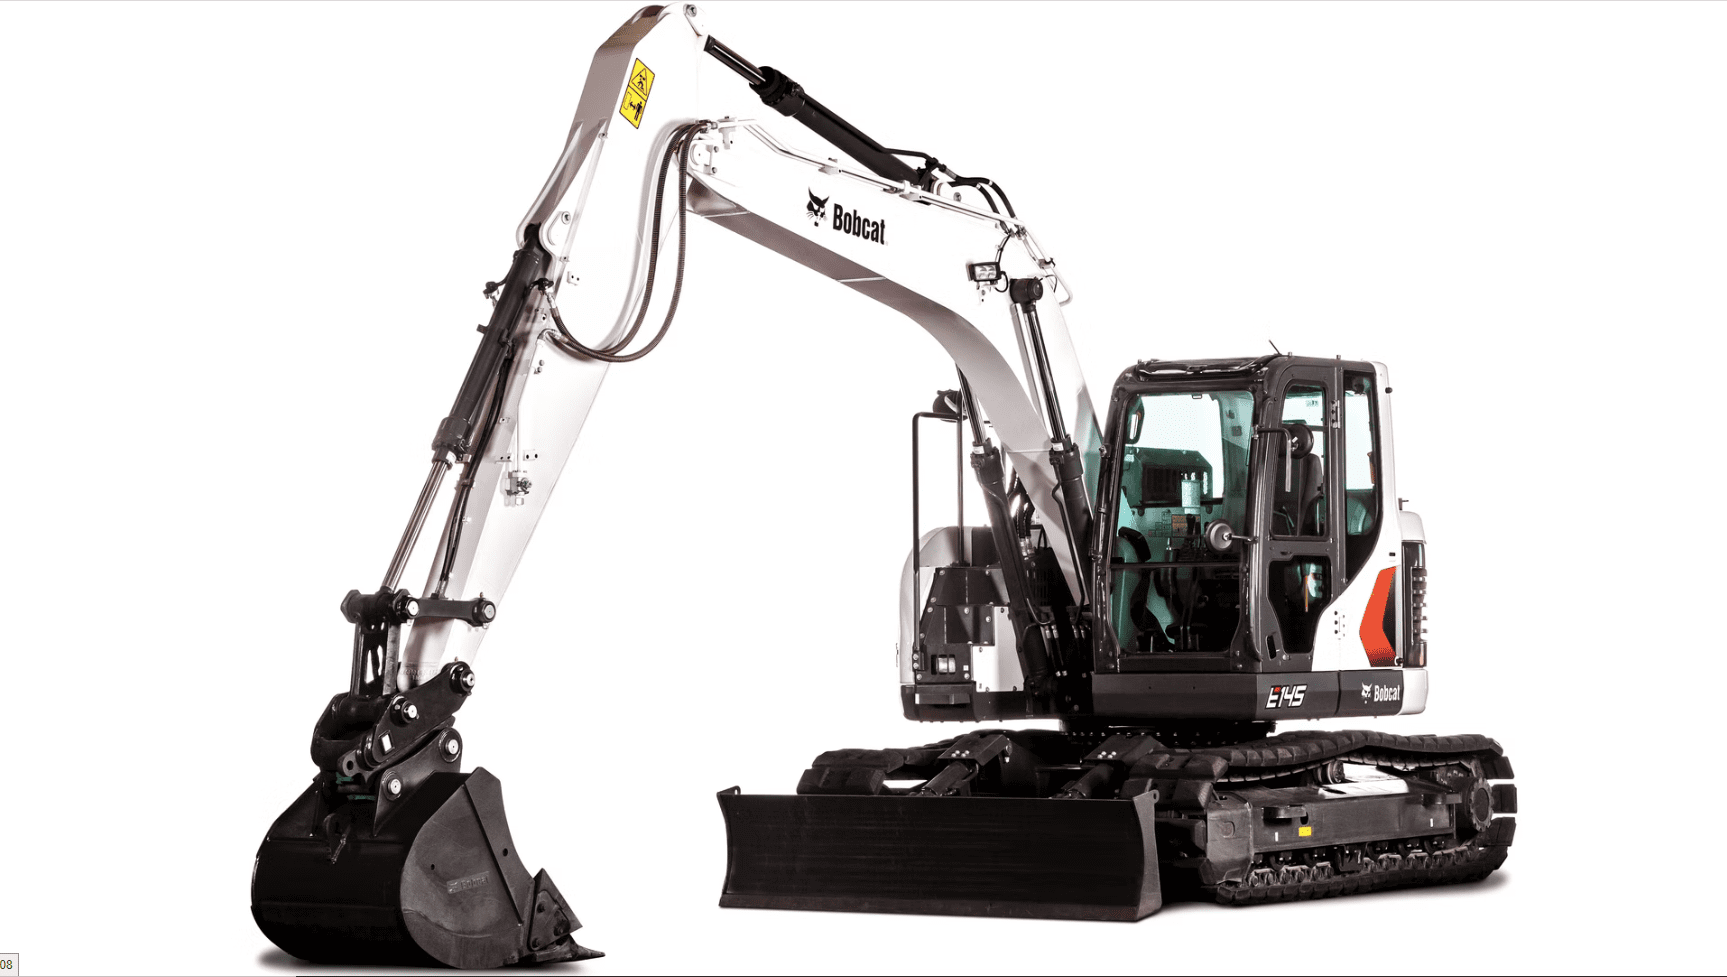 Browse Specs and more for the E145 Large Excavator - White Star Machinery